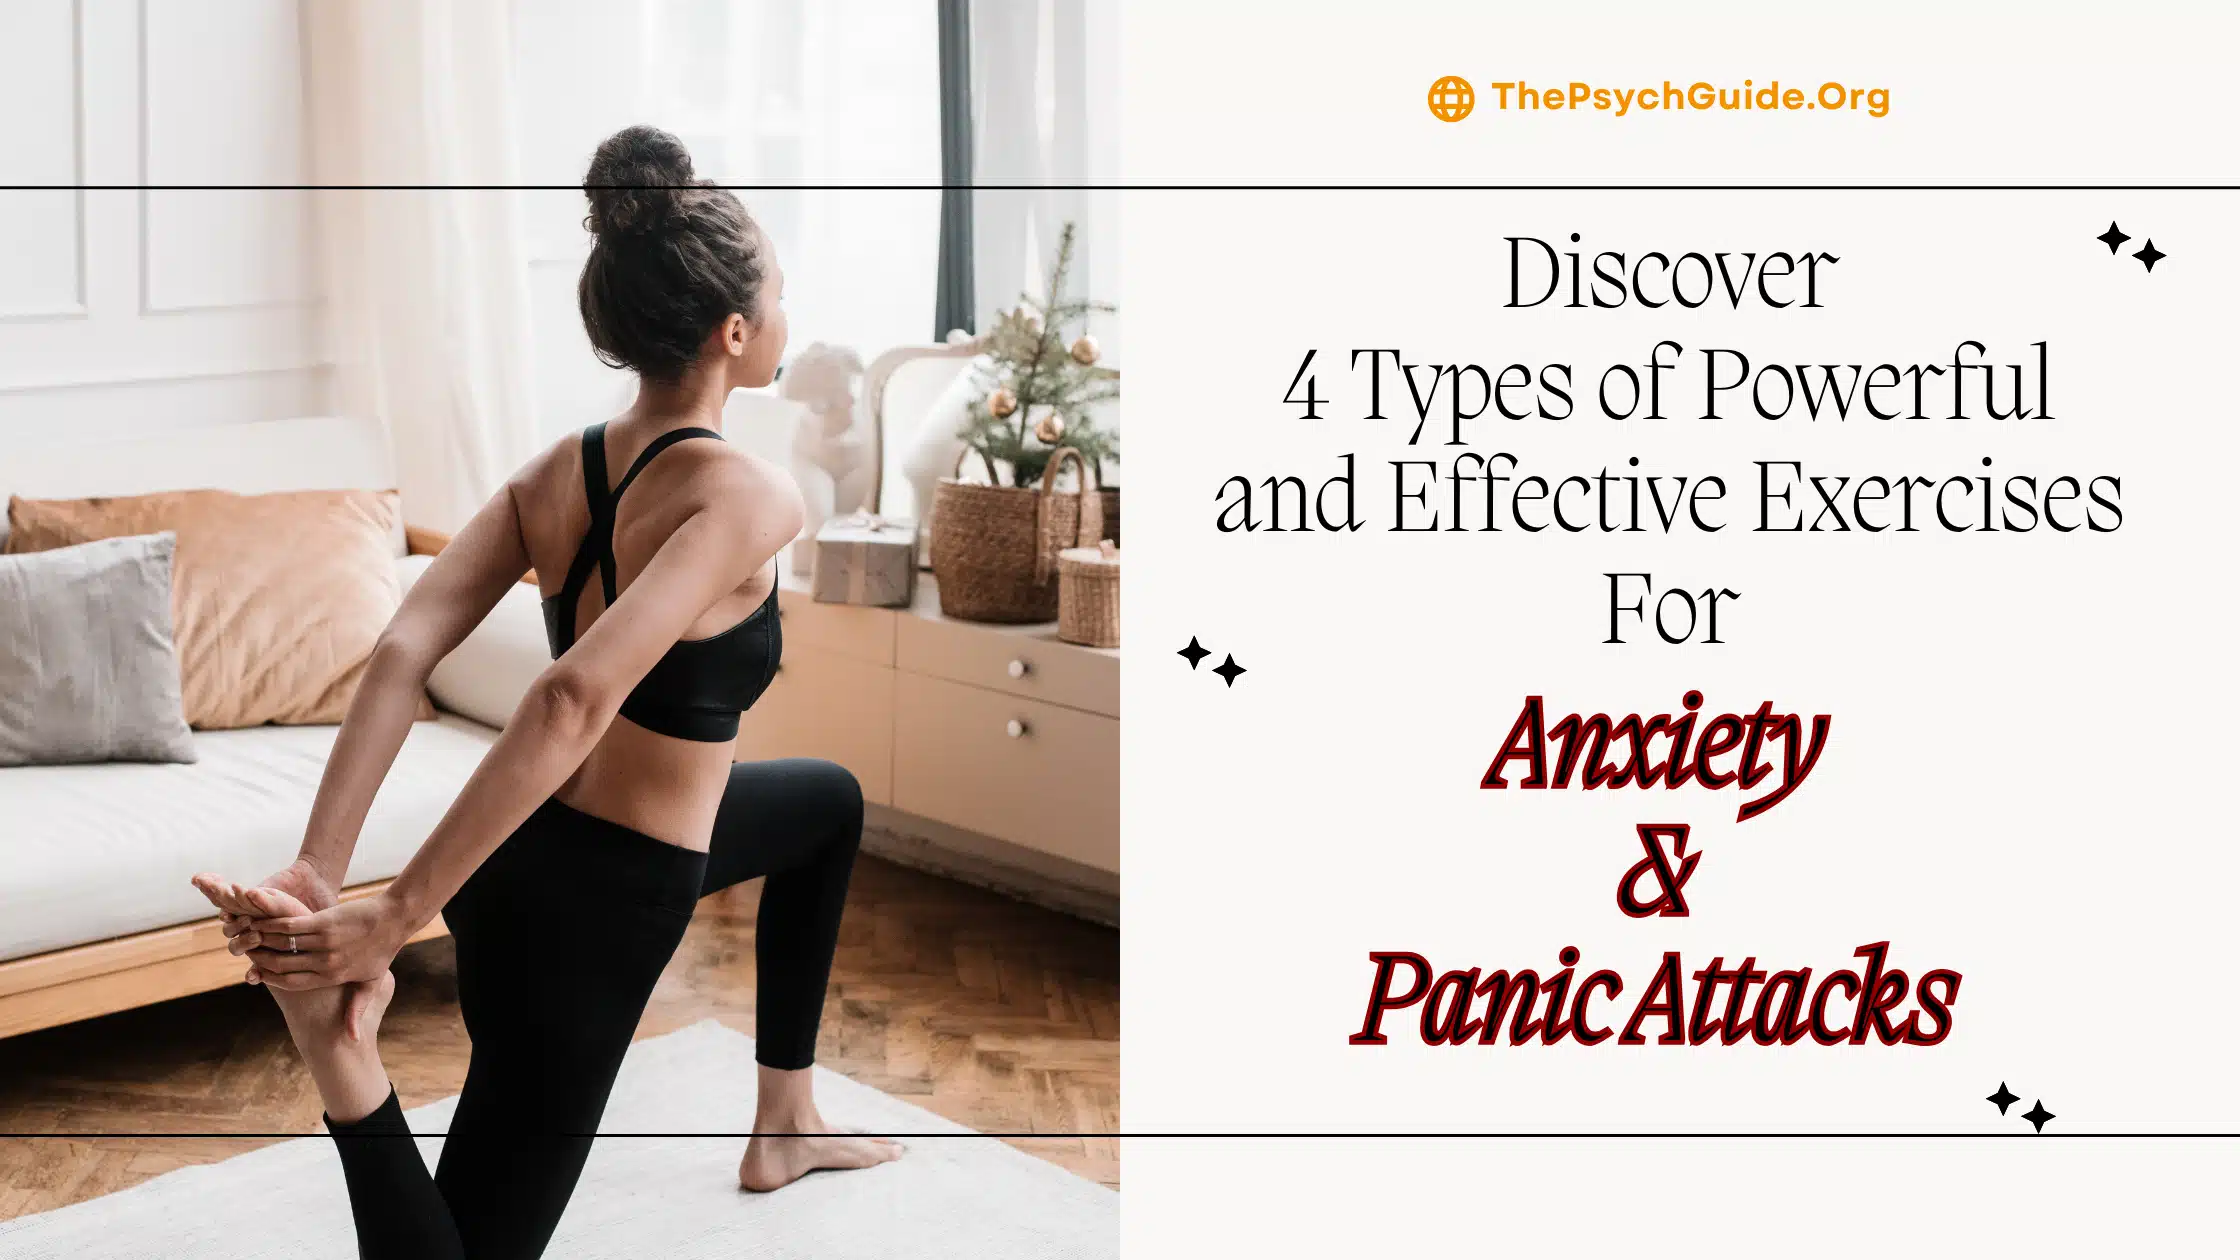 Exercises for anxiety and panic attacks